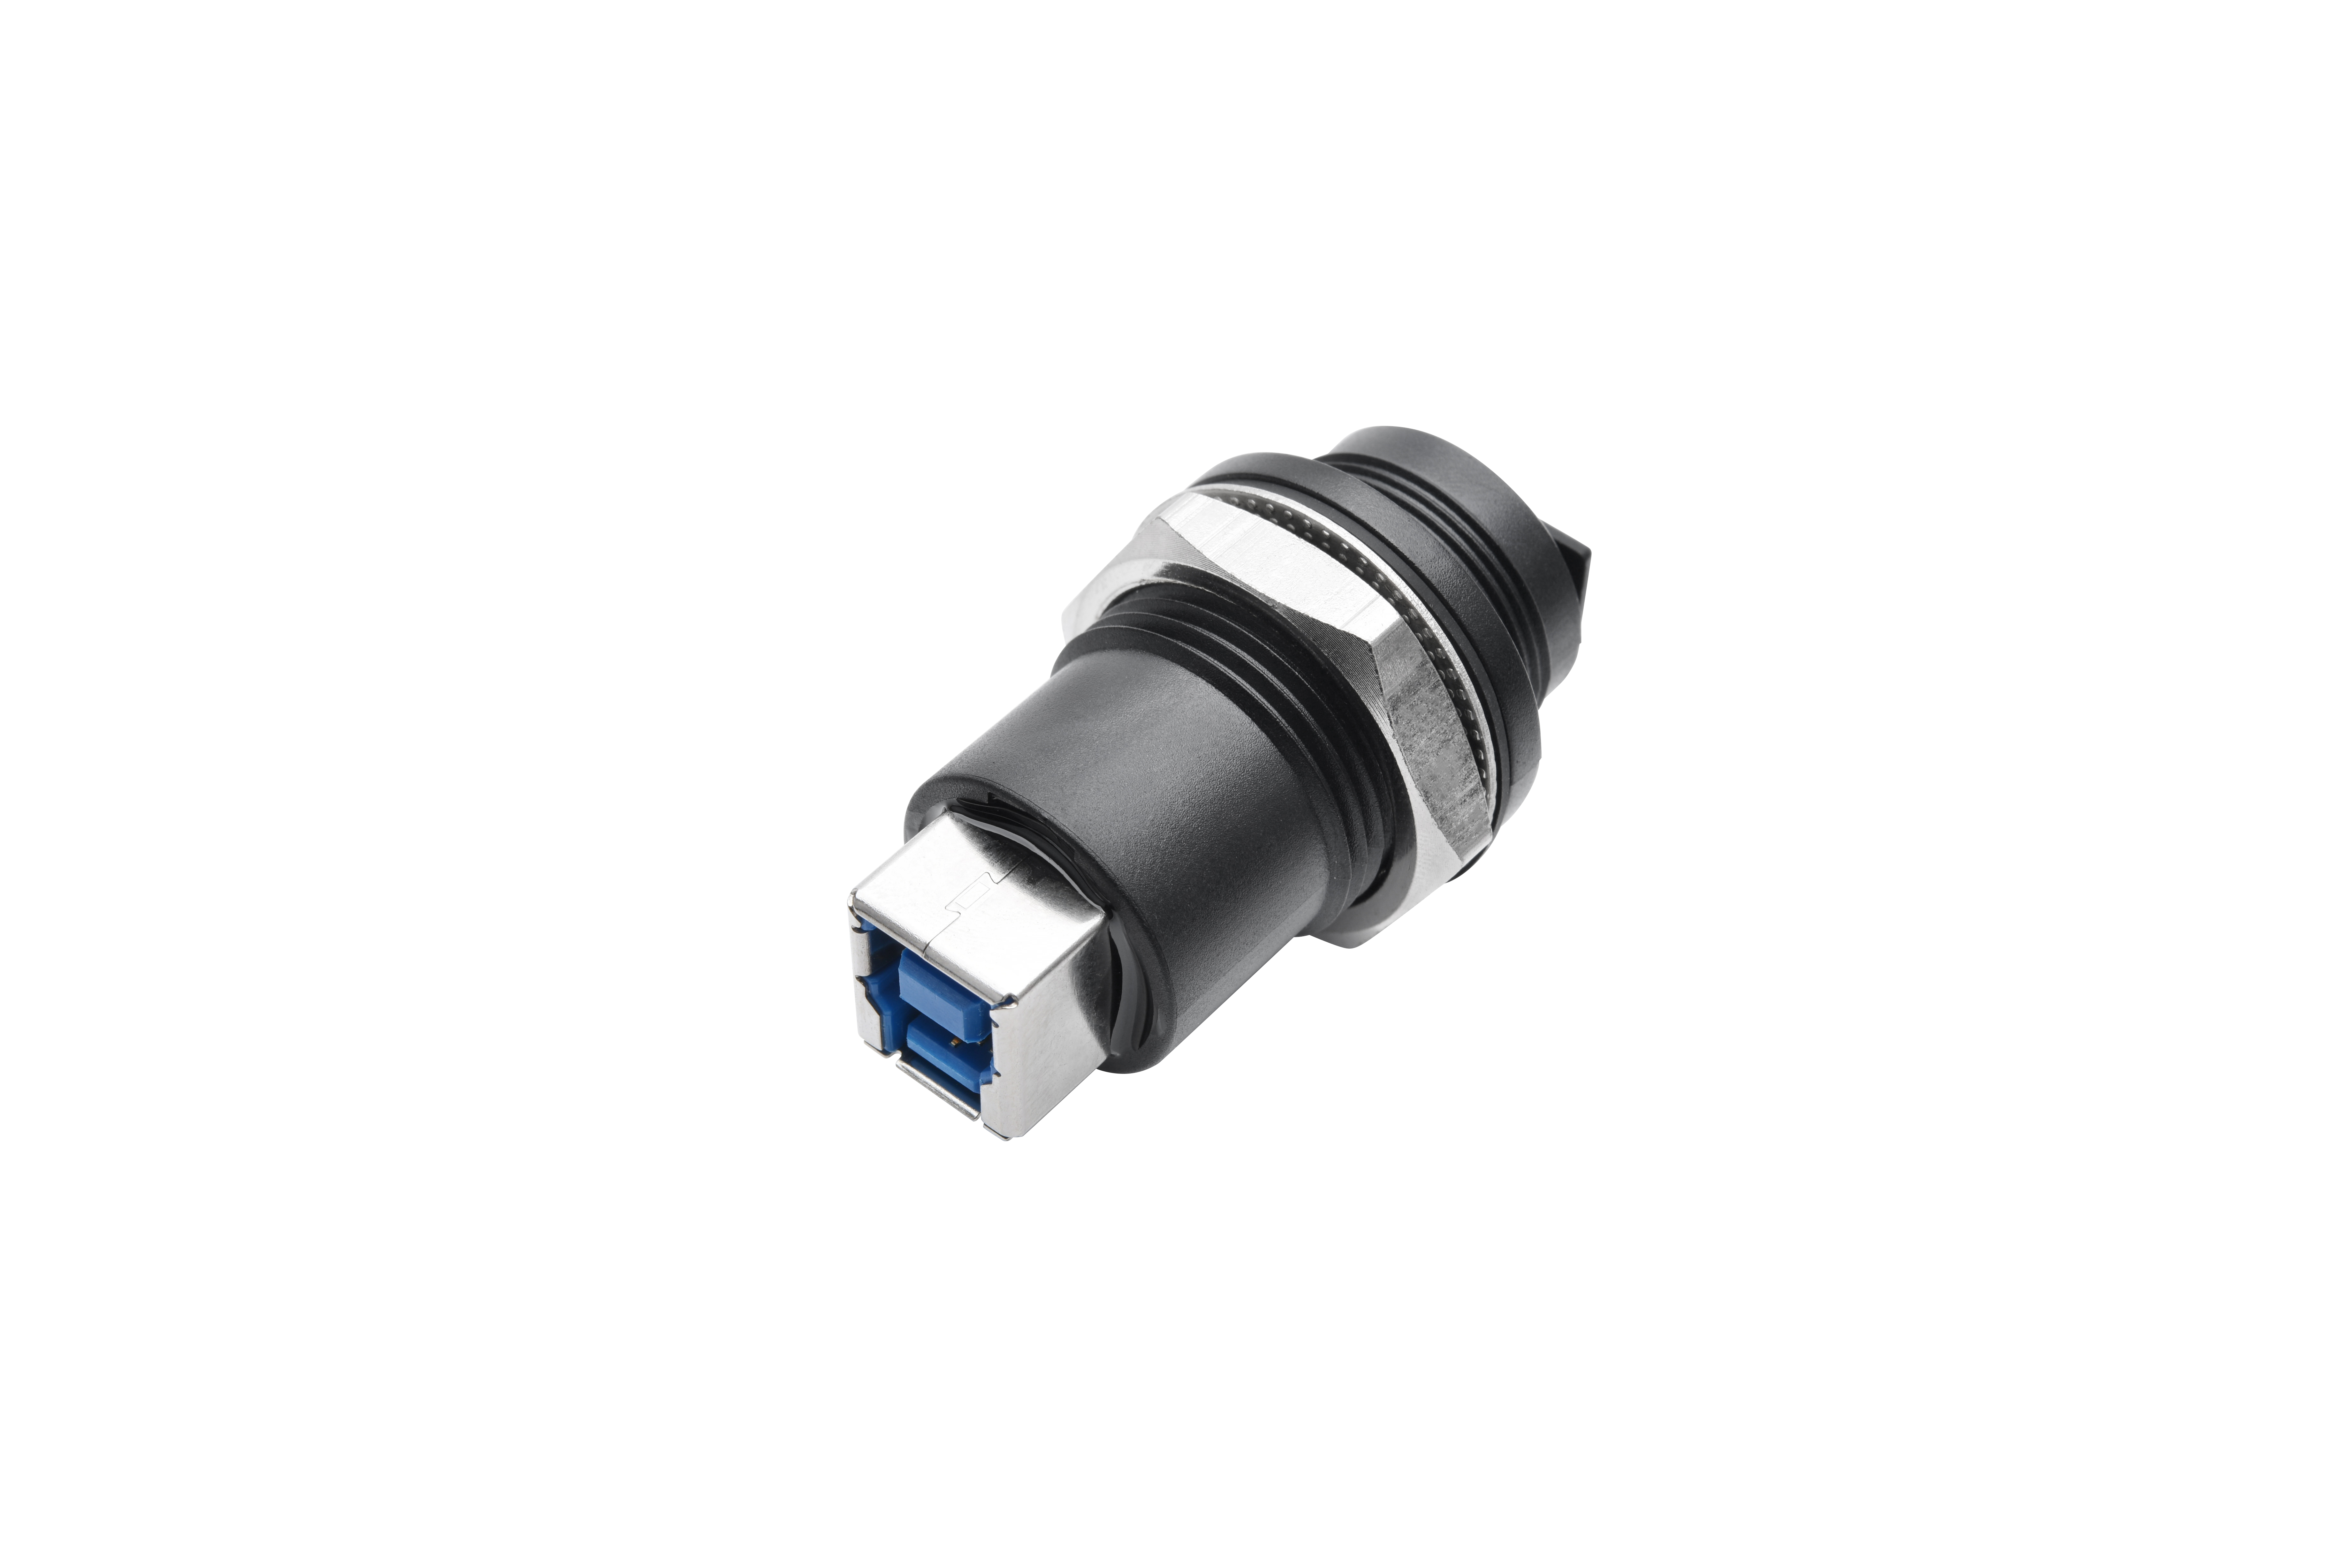 USB 3.0 (2.0 Compatible) Adapters, Panel Mounting